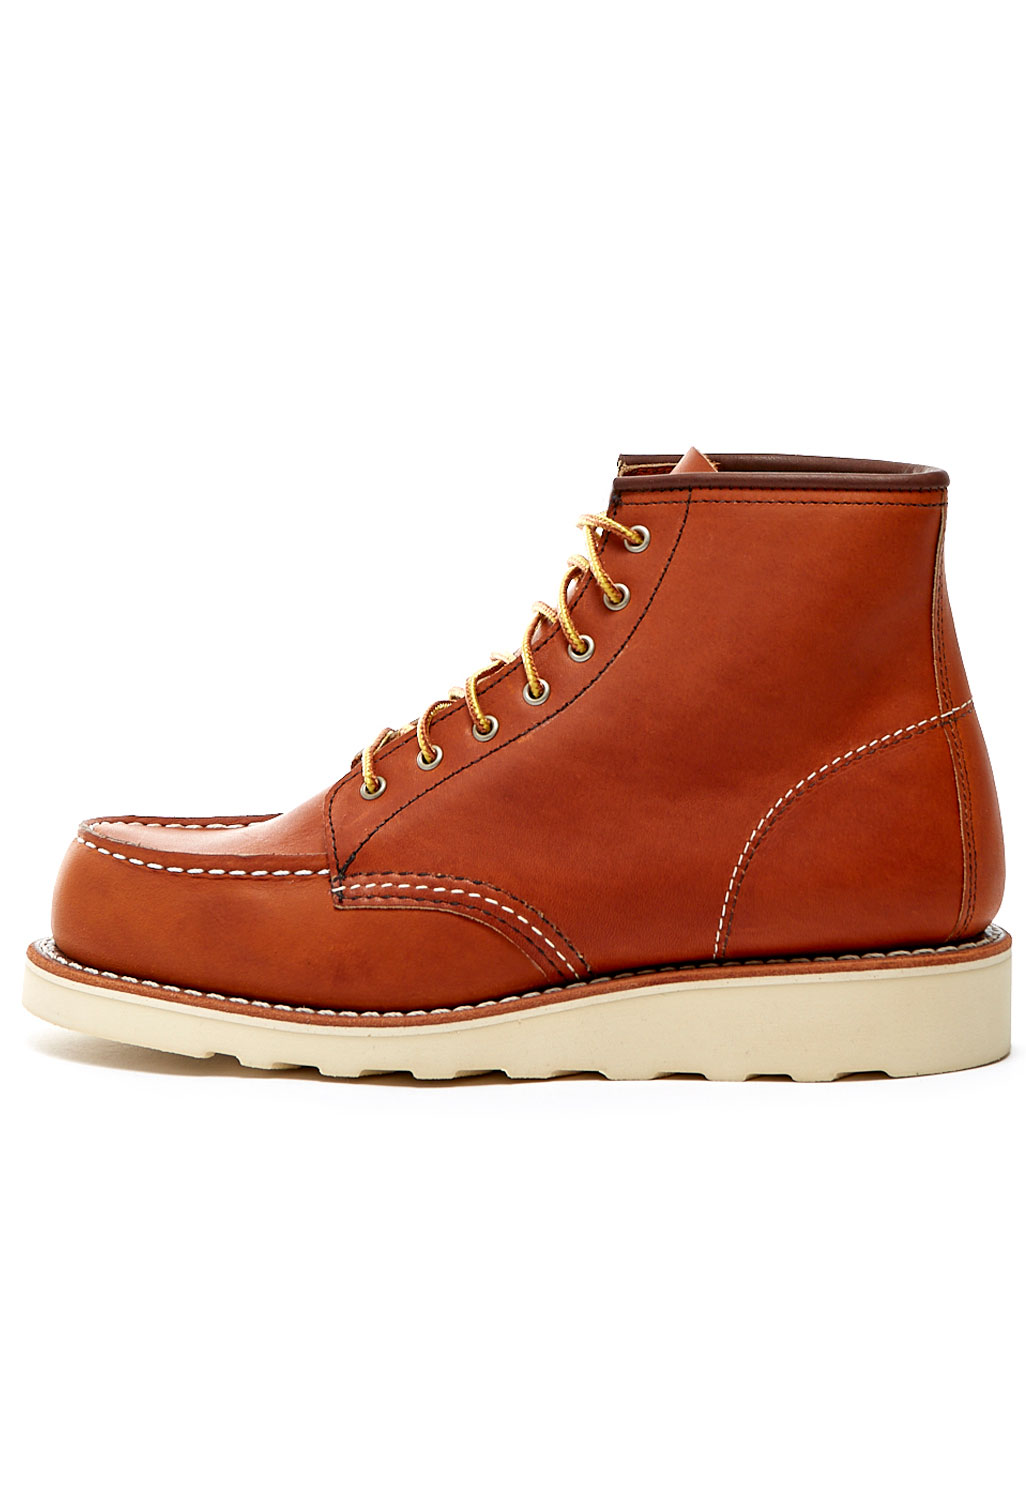 red wing boots women